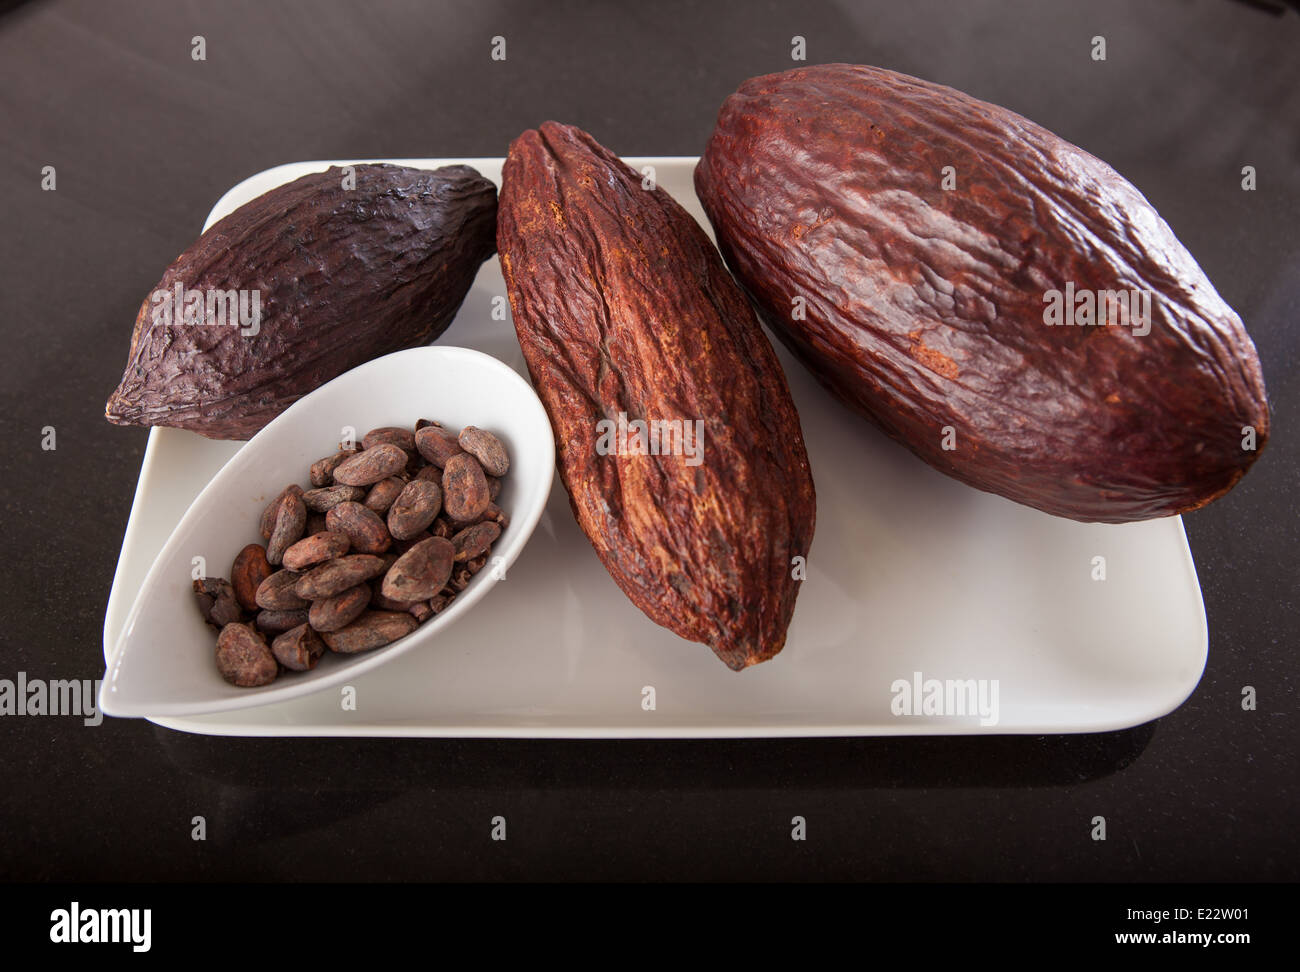 Cocoa beans in a bowl next to cocoa pods from which they originate. Stock Photo